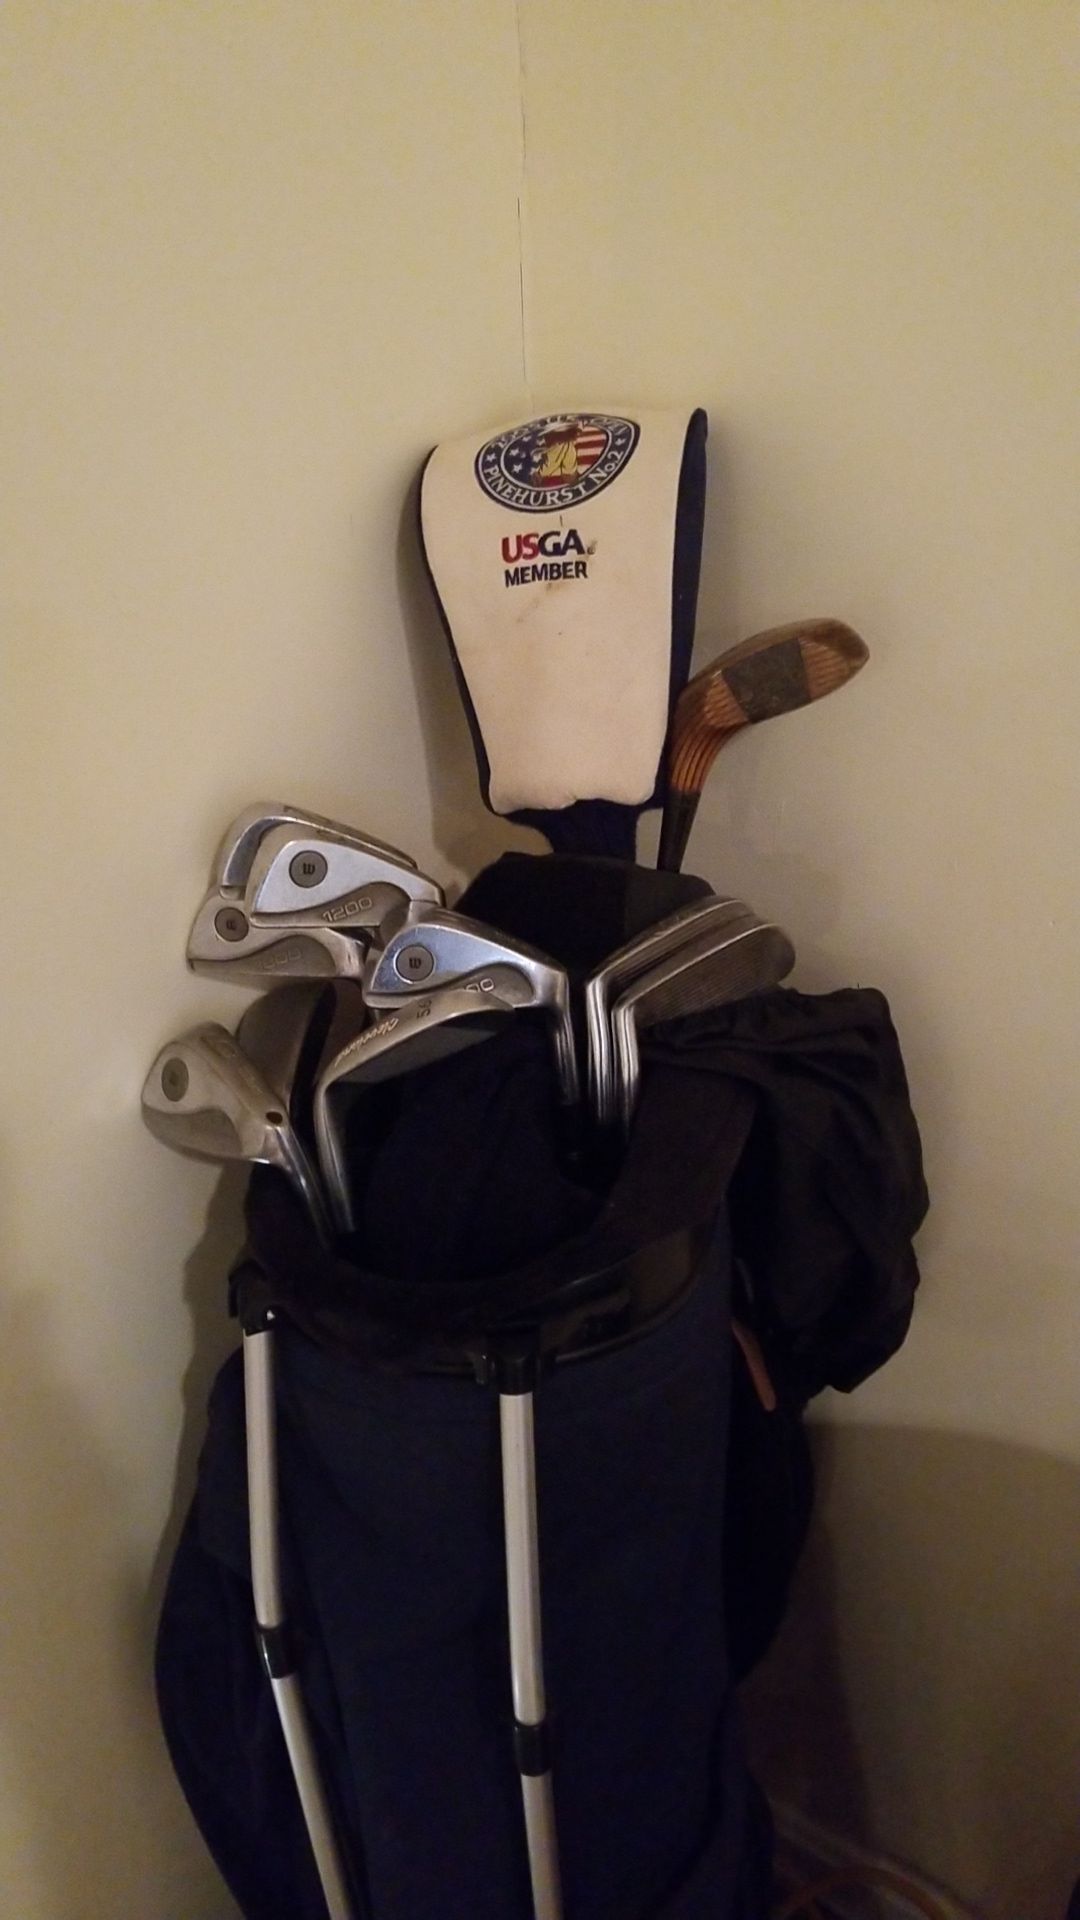 THURS 1/11 ONLY -GOLF CLUBS and EXTRA BAG